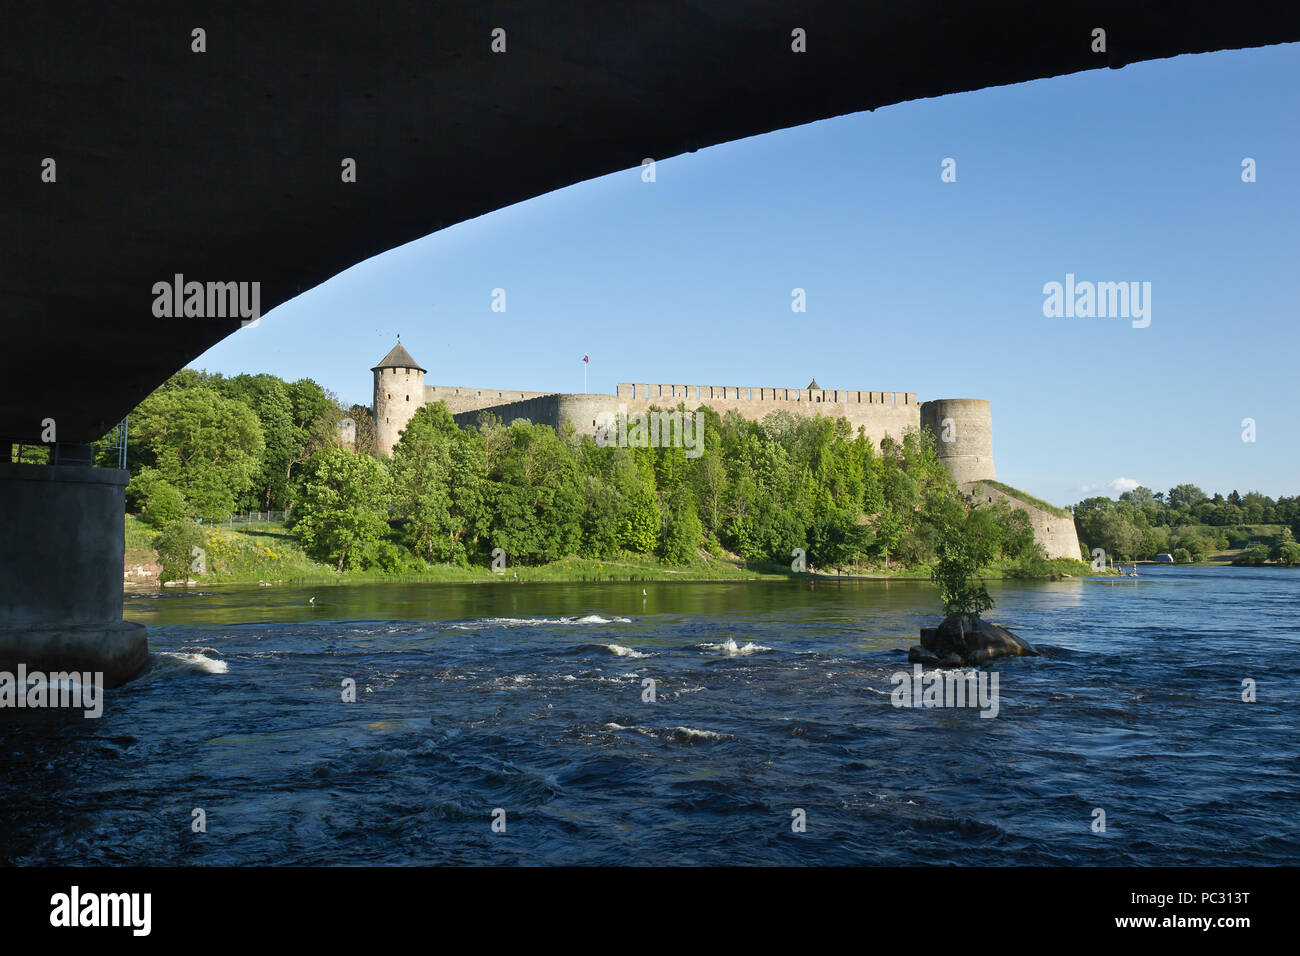 Old fortifications in Ivangorod, Russia Stock Photo